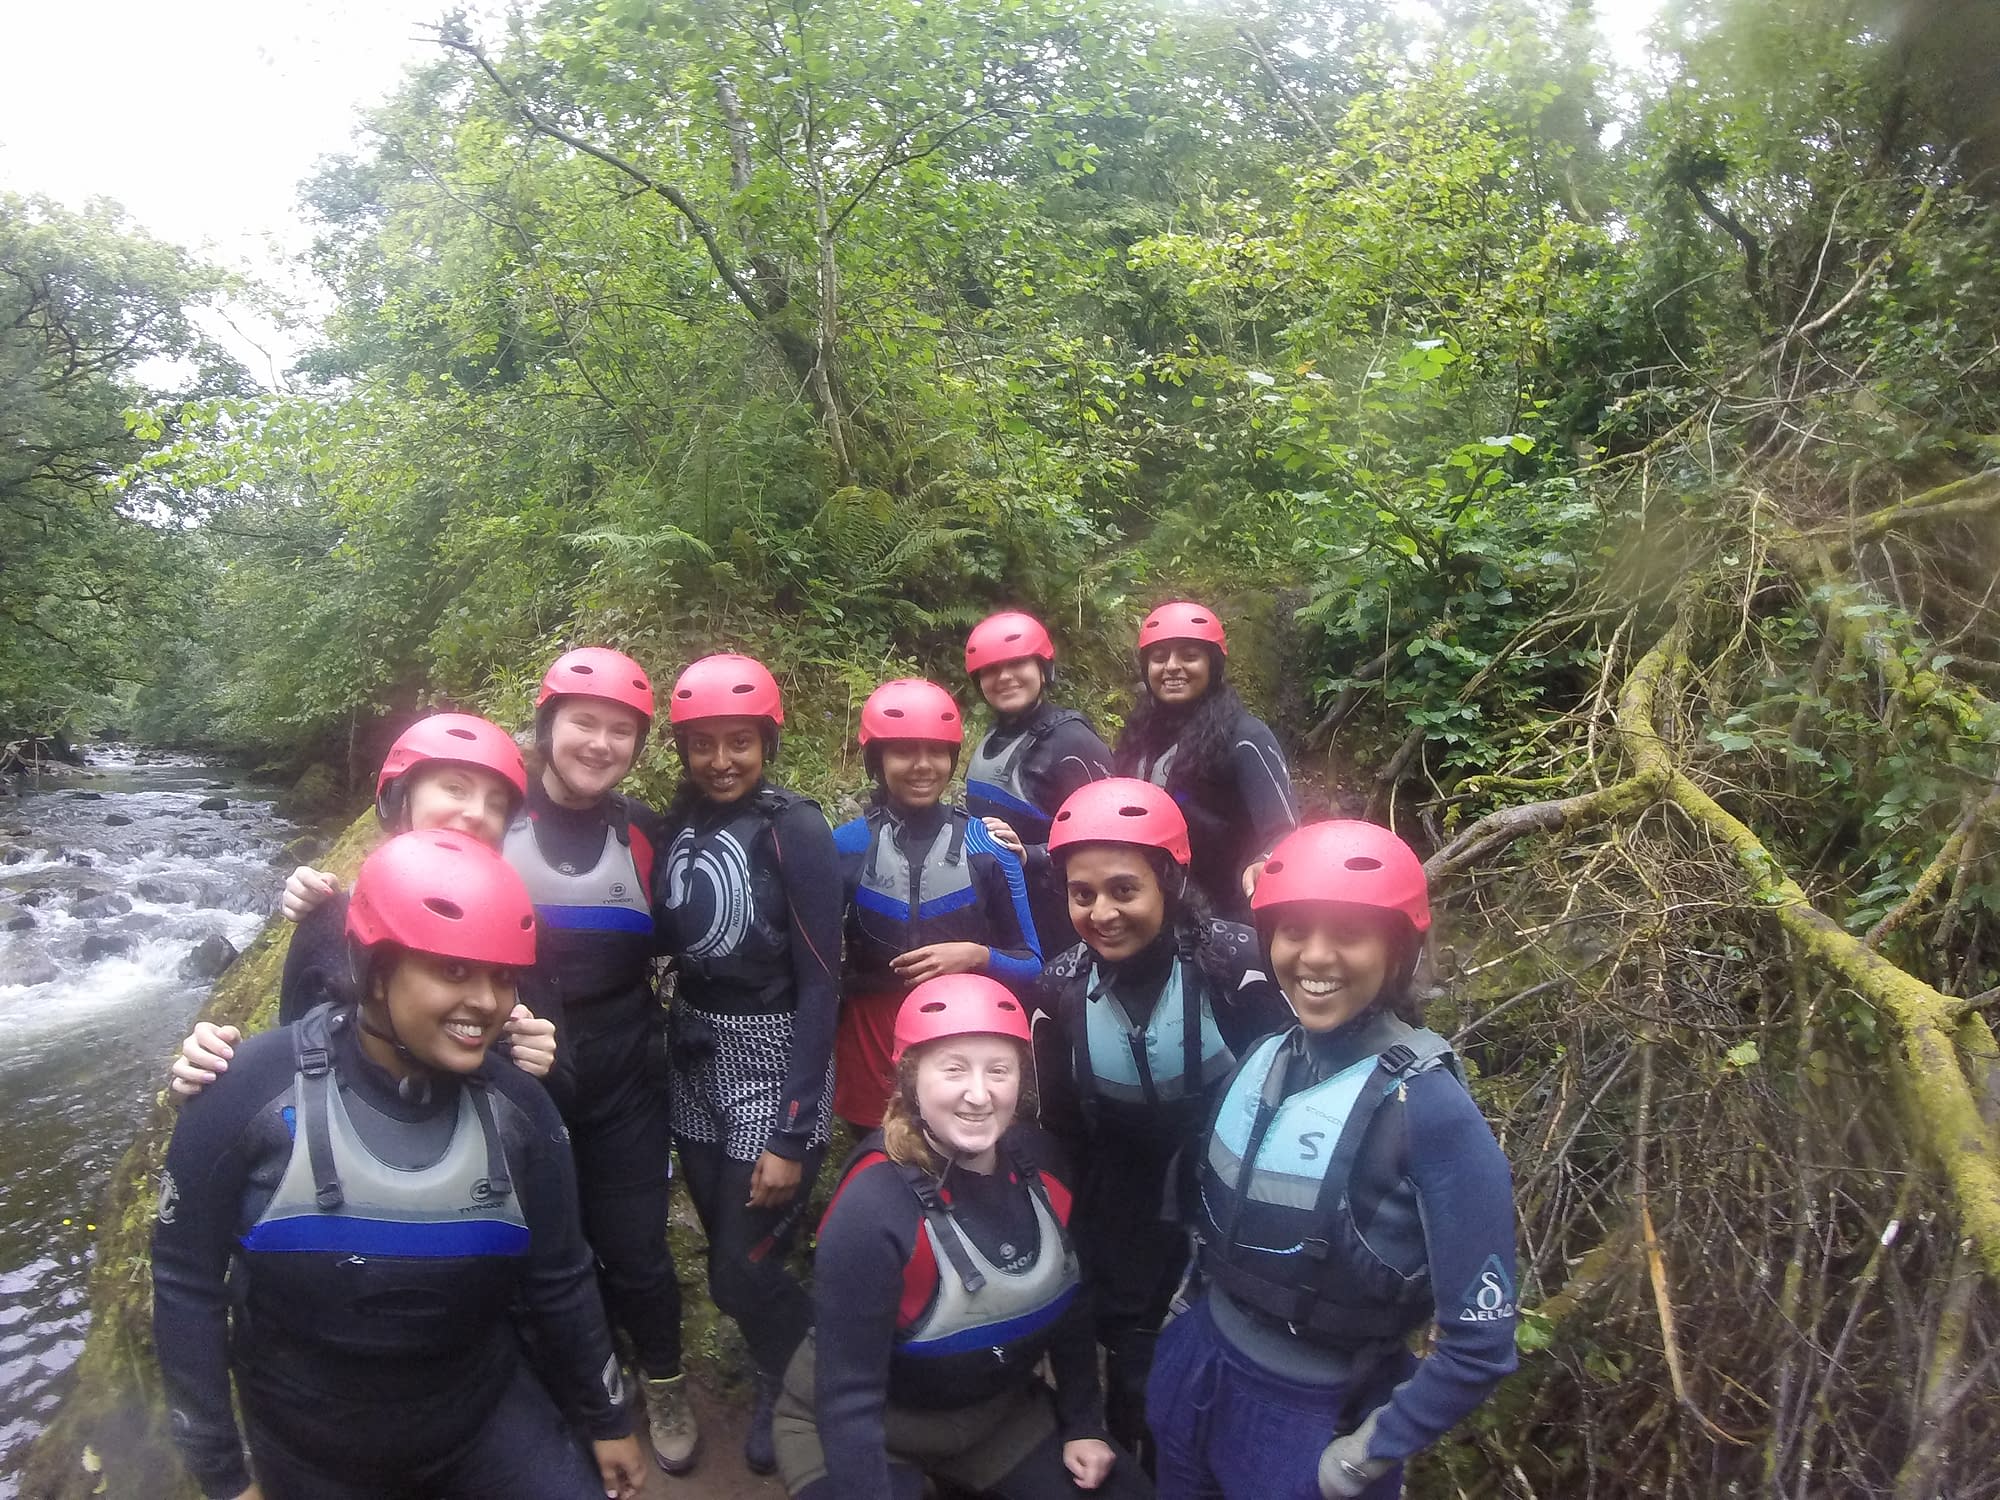 Group getting ready for their gorge walking activity